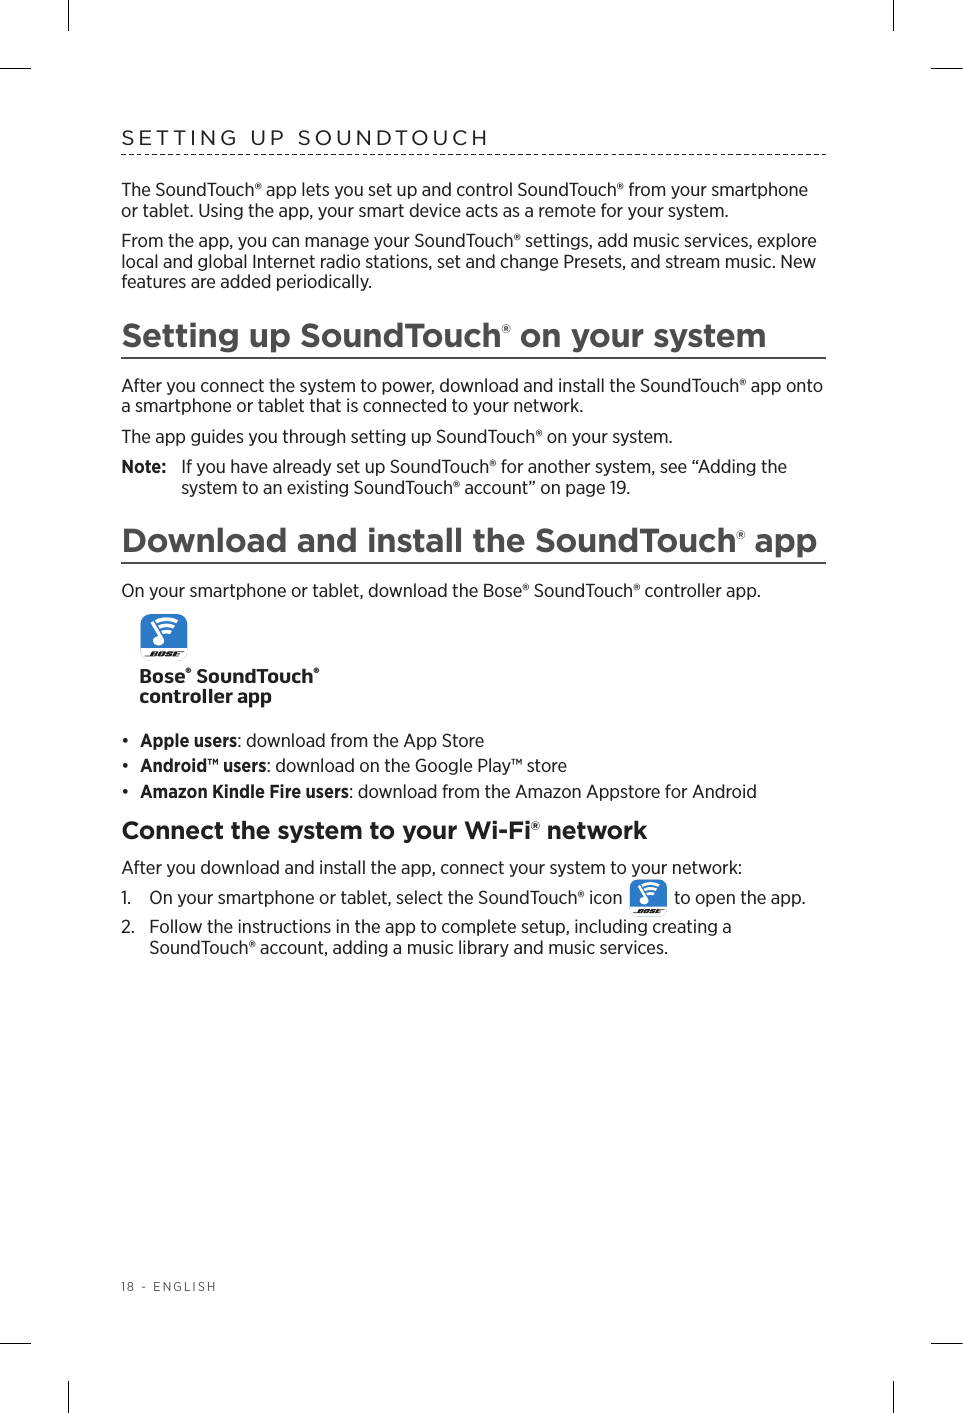 18 - ENGLISHSETTING UP SOUNDTOUCHThe SoundTouch® app lets you set up and control SoundTouch® from your  smartphone or tablet. Using the app, your smart device acts as a remote for your system.From the app, you can manage your SoundTouch® settings, add music services, explore local and global Internet radio stations, set and change Presets, and stream music. New features are added periodically.Setting up SoundTouch® on your systemAfter you connect the system to power, download and install the  SoundTouch® app onto a smartphone or tablet that is connected to your network. The app guides you through setting up SoundTouch® on your system. Note:  If you have already set up SoundTouch® for another system, see “Adding the system to an existing  SoundTouch® account” on page 19.Download and install the SoundTouch® appOn your smartphone or tablet, download the Bose® SoundTouch® controller app.Bose® SoundTouch® controller app•  Apple users: download from the App Store•  Android™ users: download on the Google Play™ store•  Amazon Kindle Fire users: download from the Amazon Appstore for AndroidConnect the system to your Wi-Fi® networkAfter you download and install the app, connect your system to your network:1.  On your smartphone or tablet, select the SoundTouch® icon   to open the app.2.  Follow the instructions in the app to complete setup, including creating a  S oundTouch® account, adding a music library and music services.